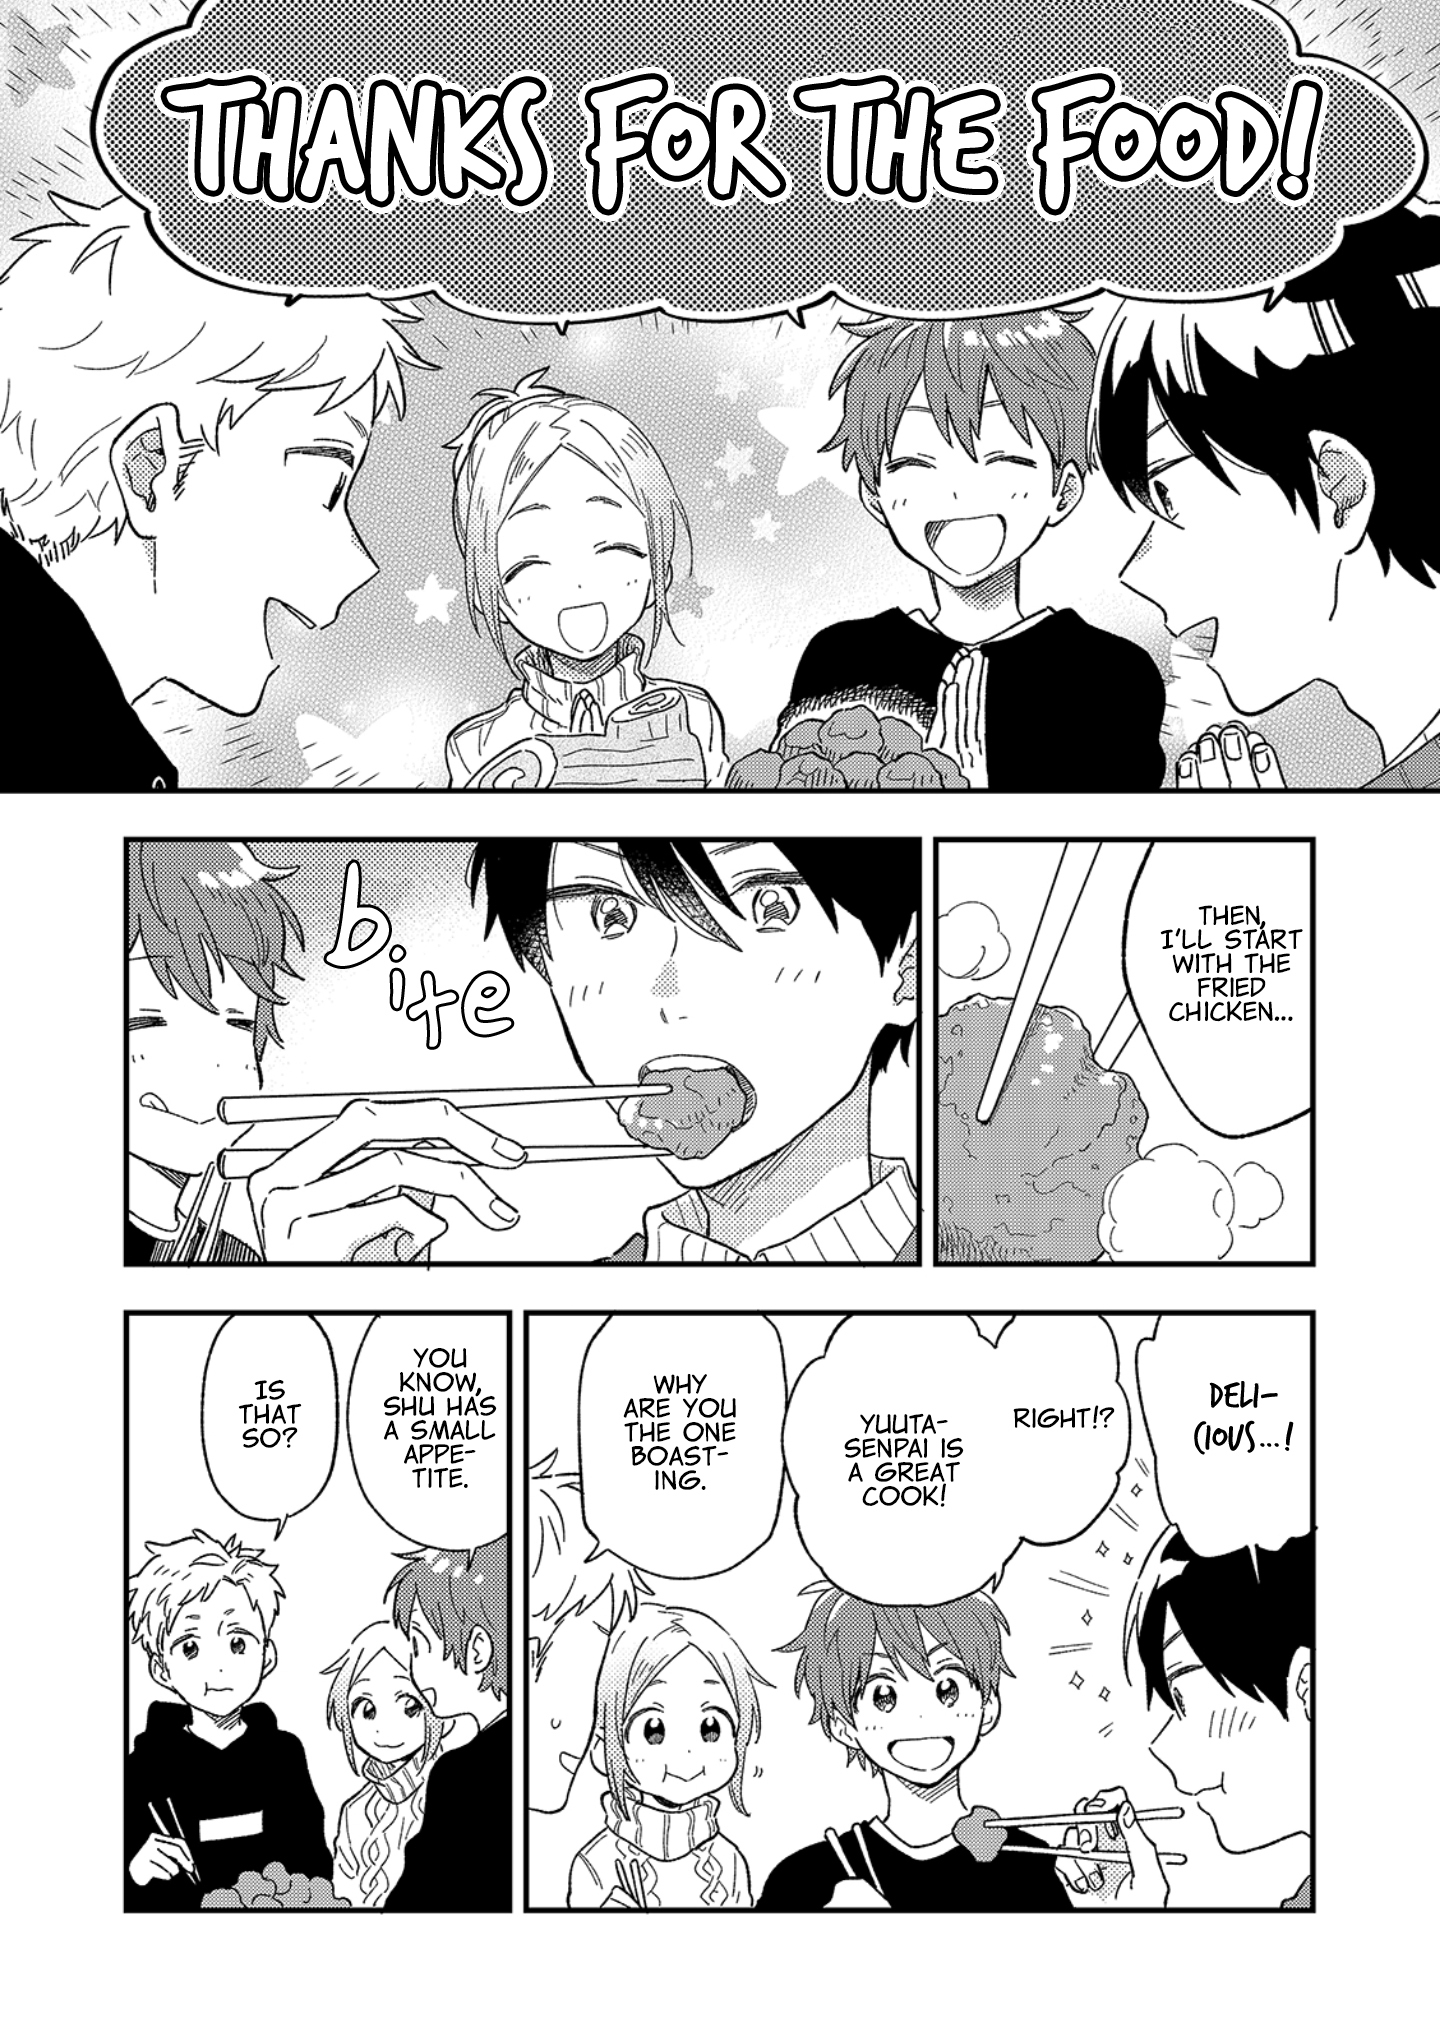 The Male High School Students Are Hungry Again Today vol.1 ch.5